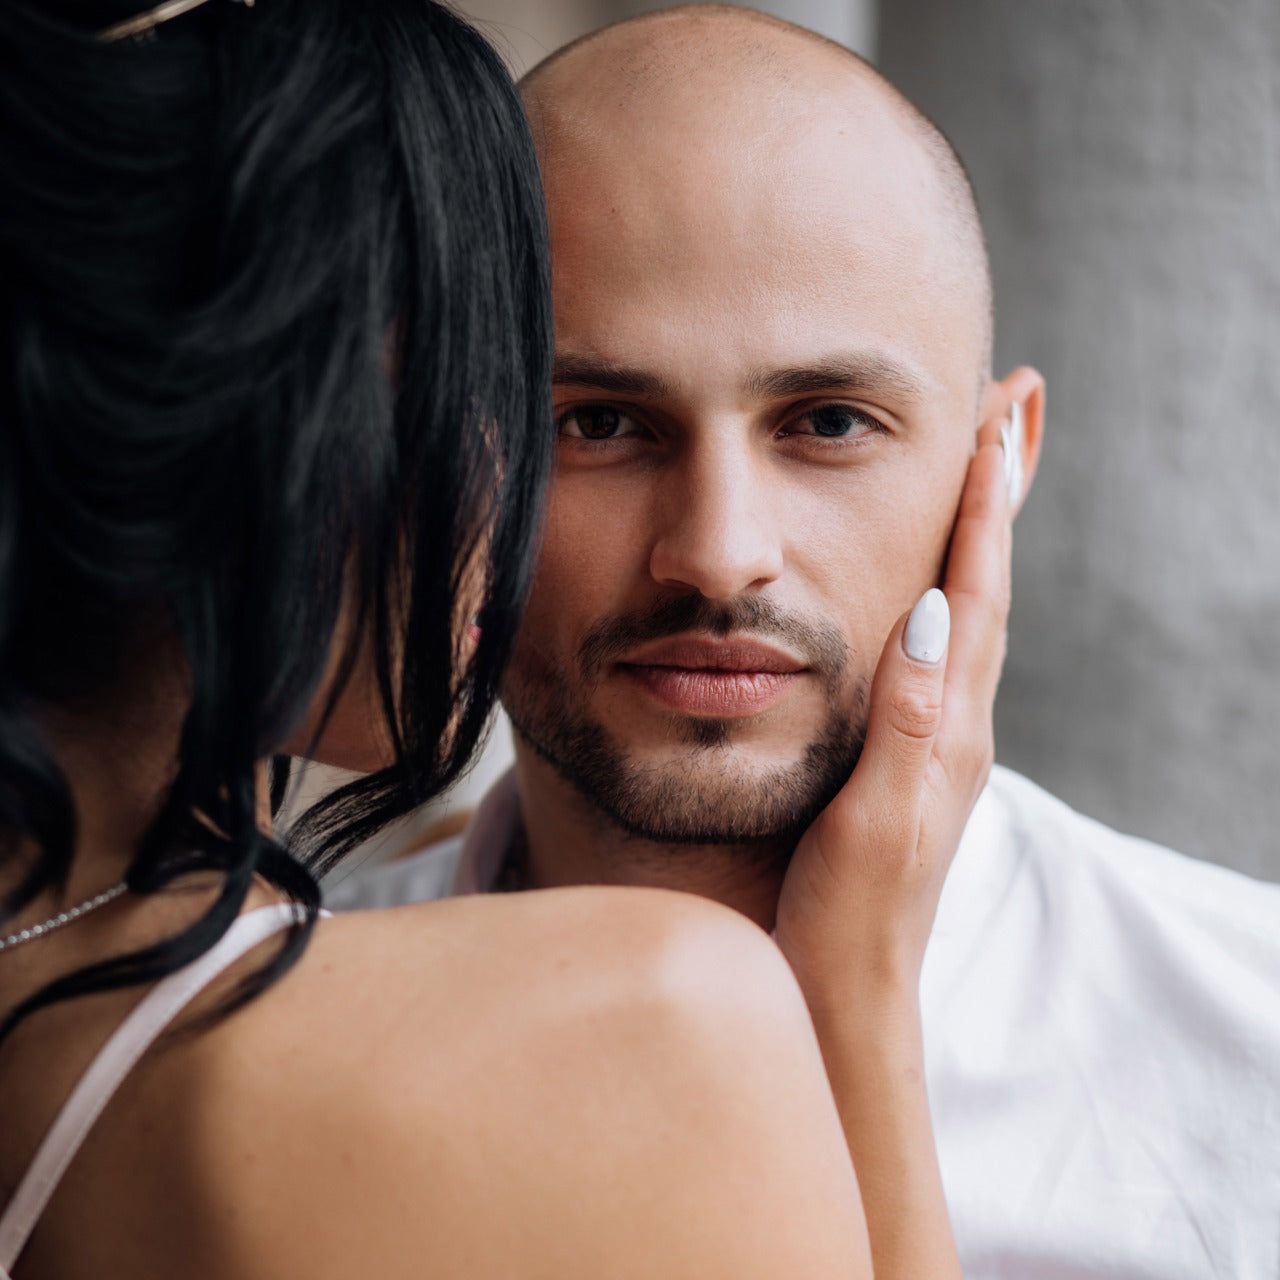 Dating a bald guy? The pros and cons 2023 Reliable Research